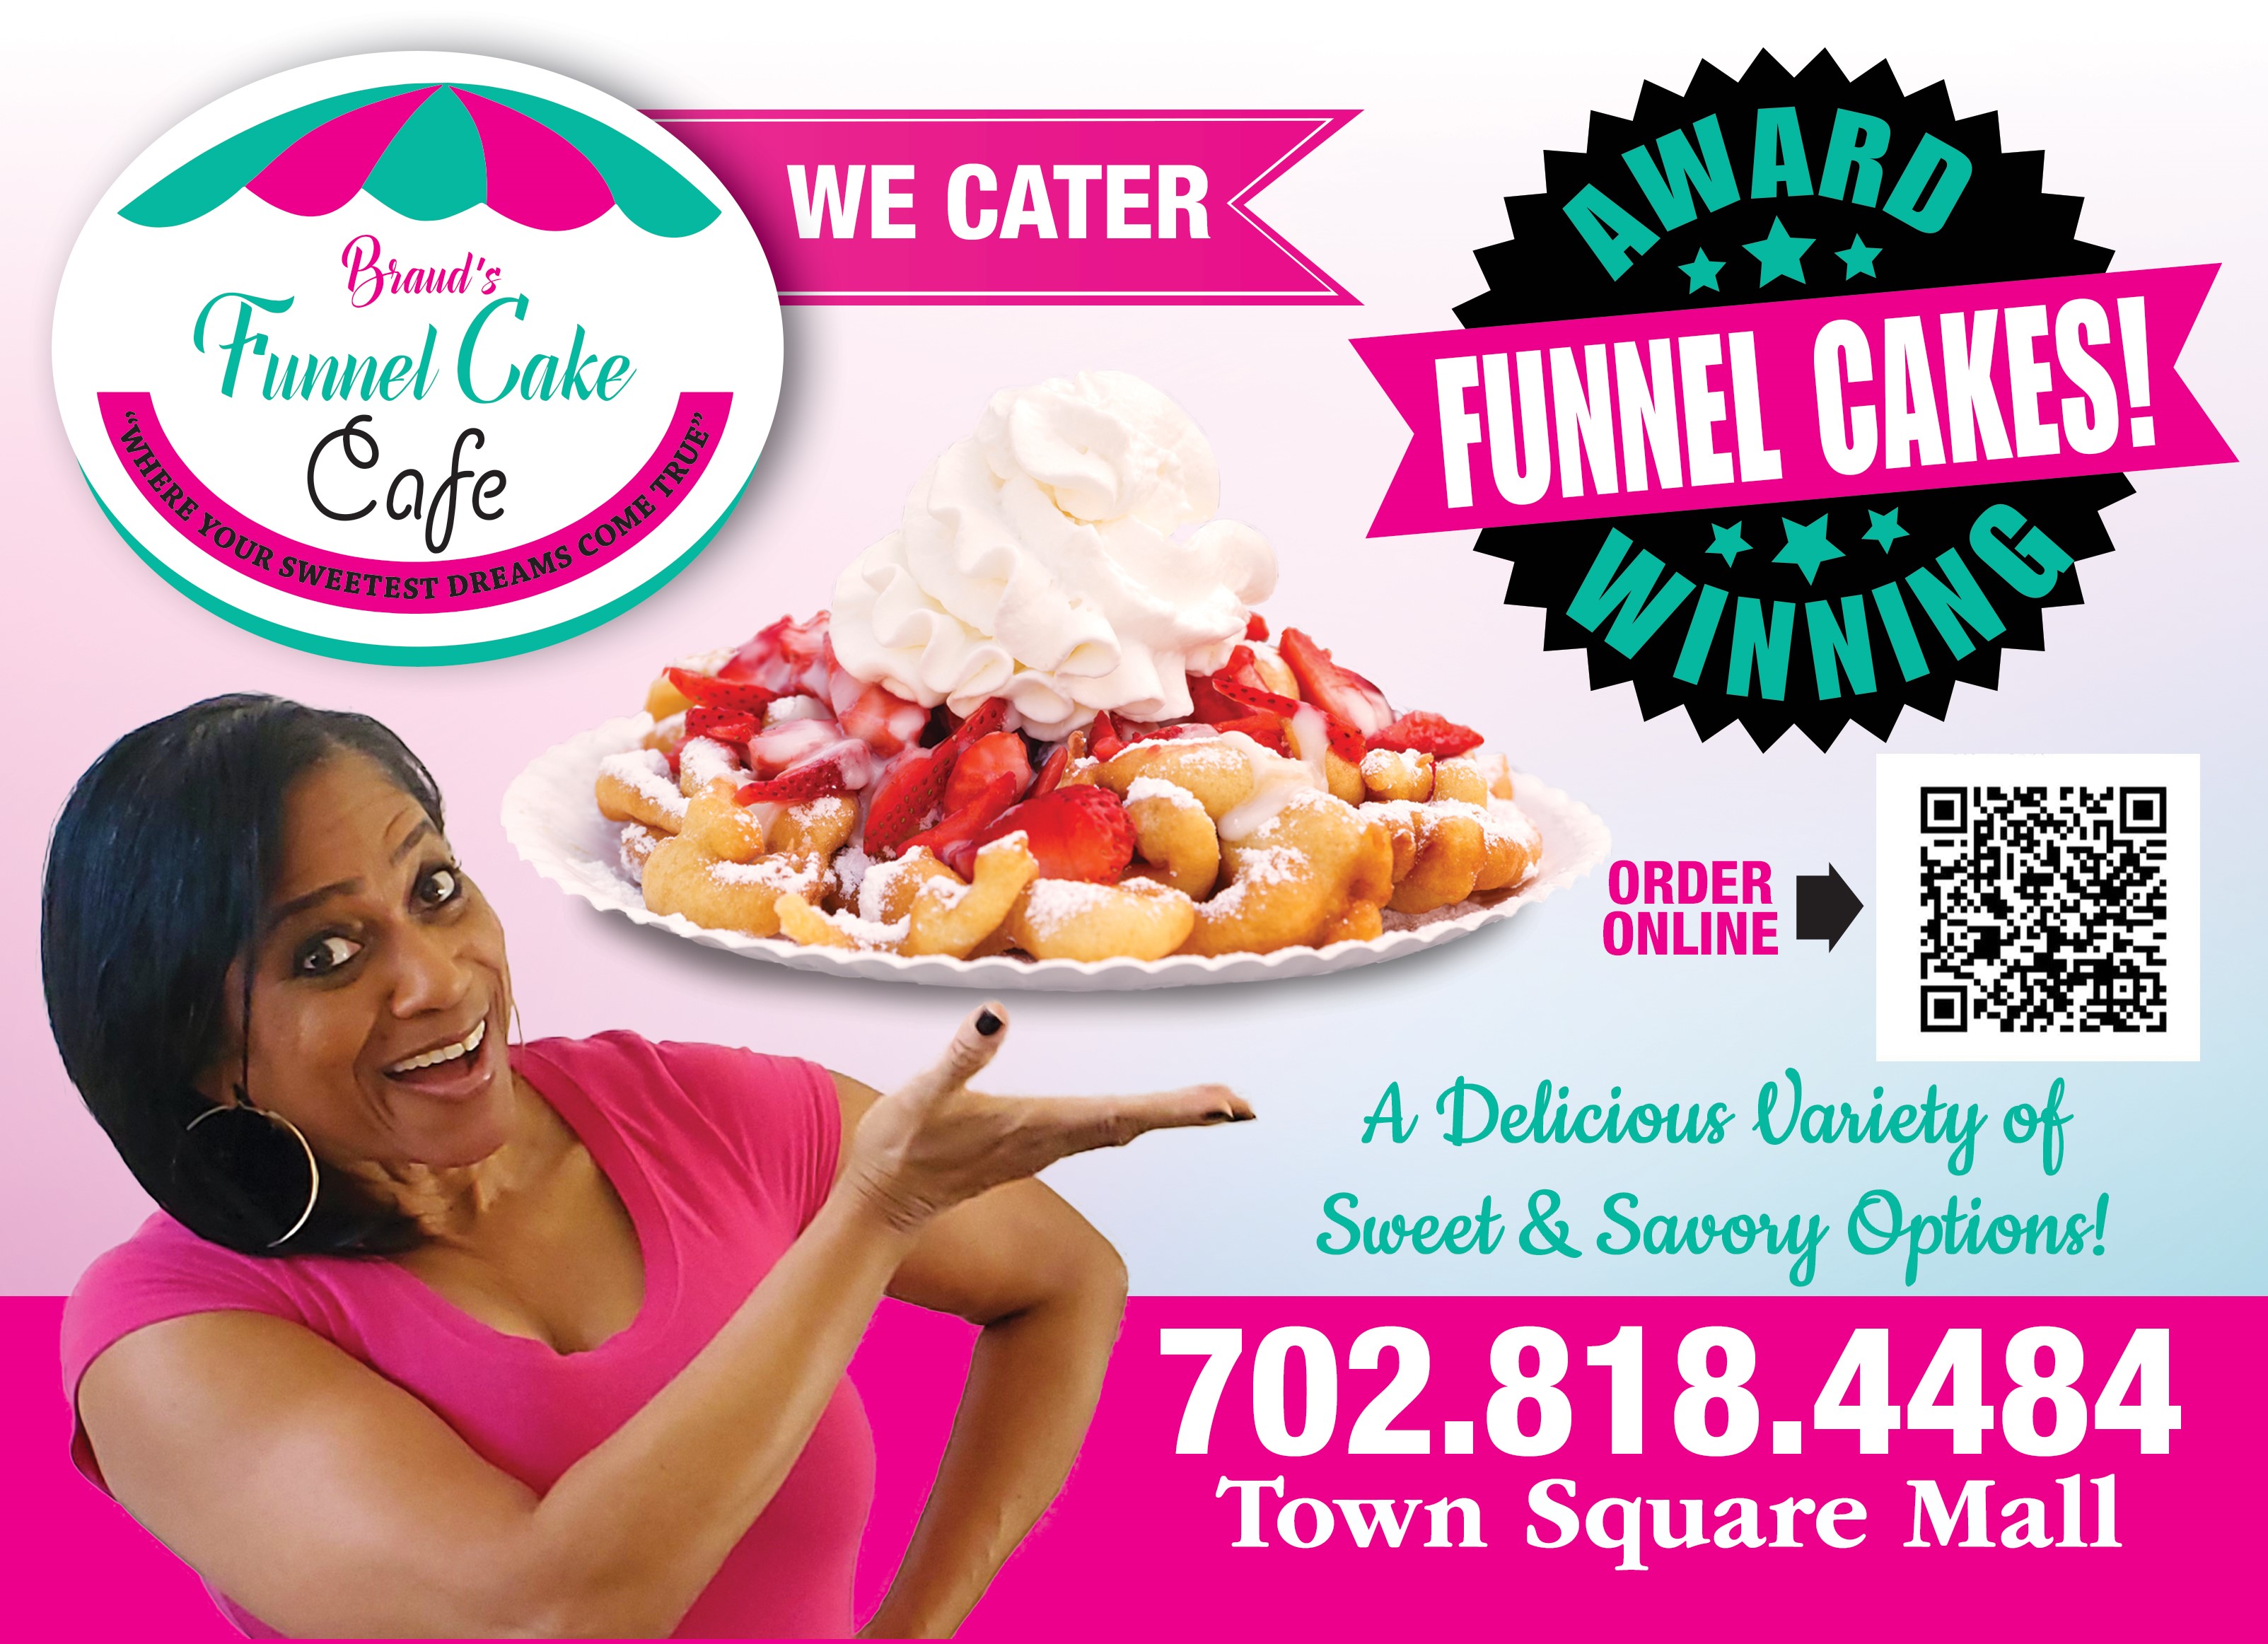 Braud's Funnel Cake Cafe...Where Your Sweetest Dreams Come True